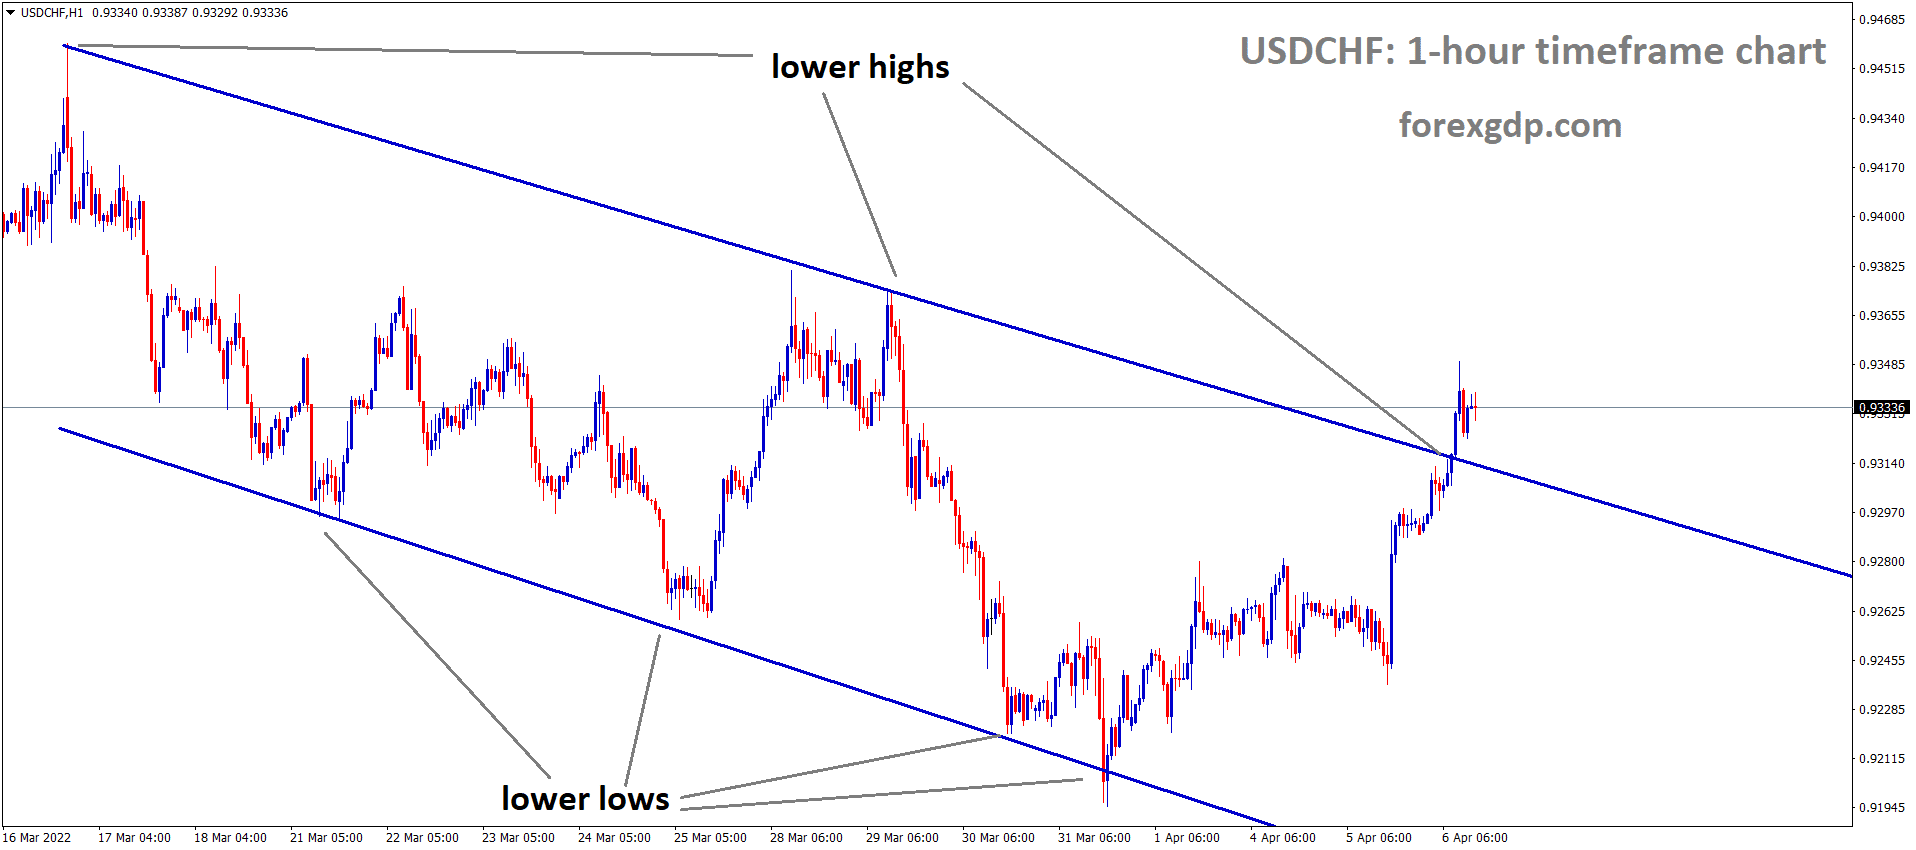 USDCHF H1 Time Frame Market is moving in the Descending channel and Market has reached the Lower high area of the Descending channel.